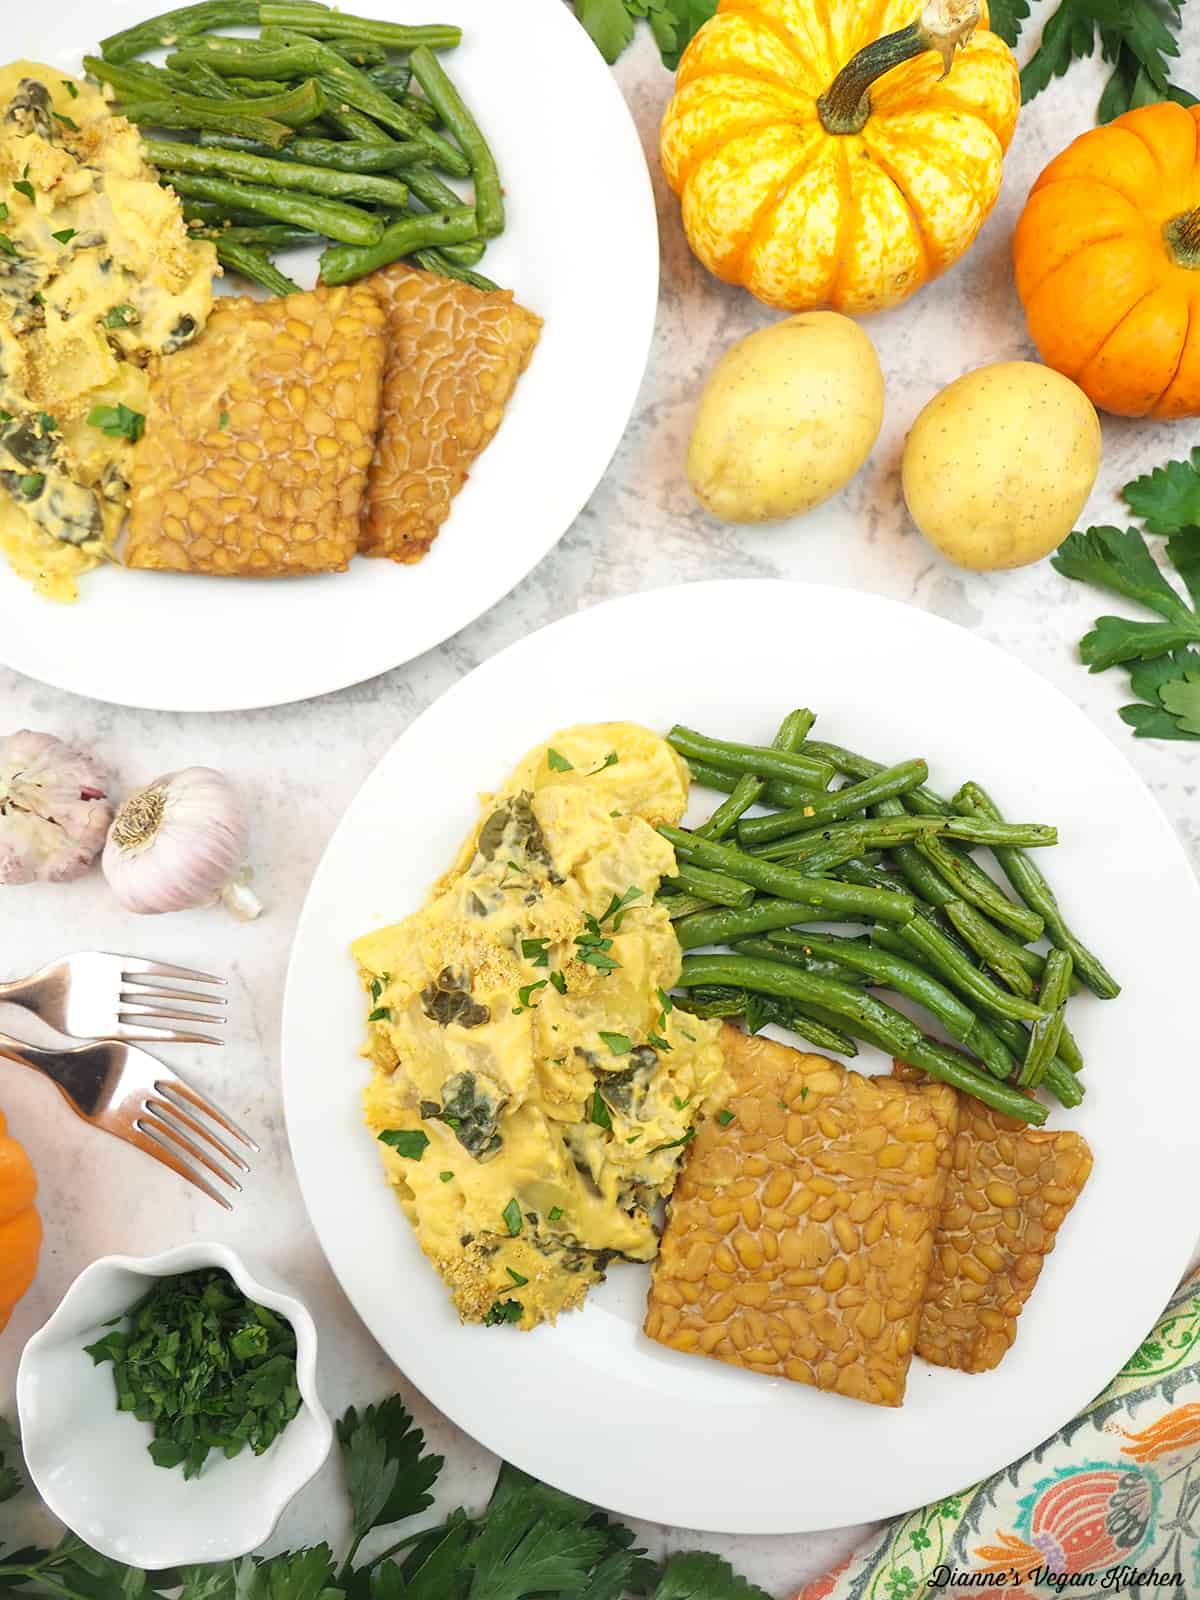 plates of potatoes, green beans, and roasted tempeh